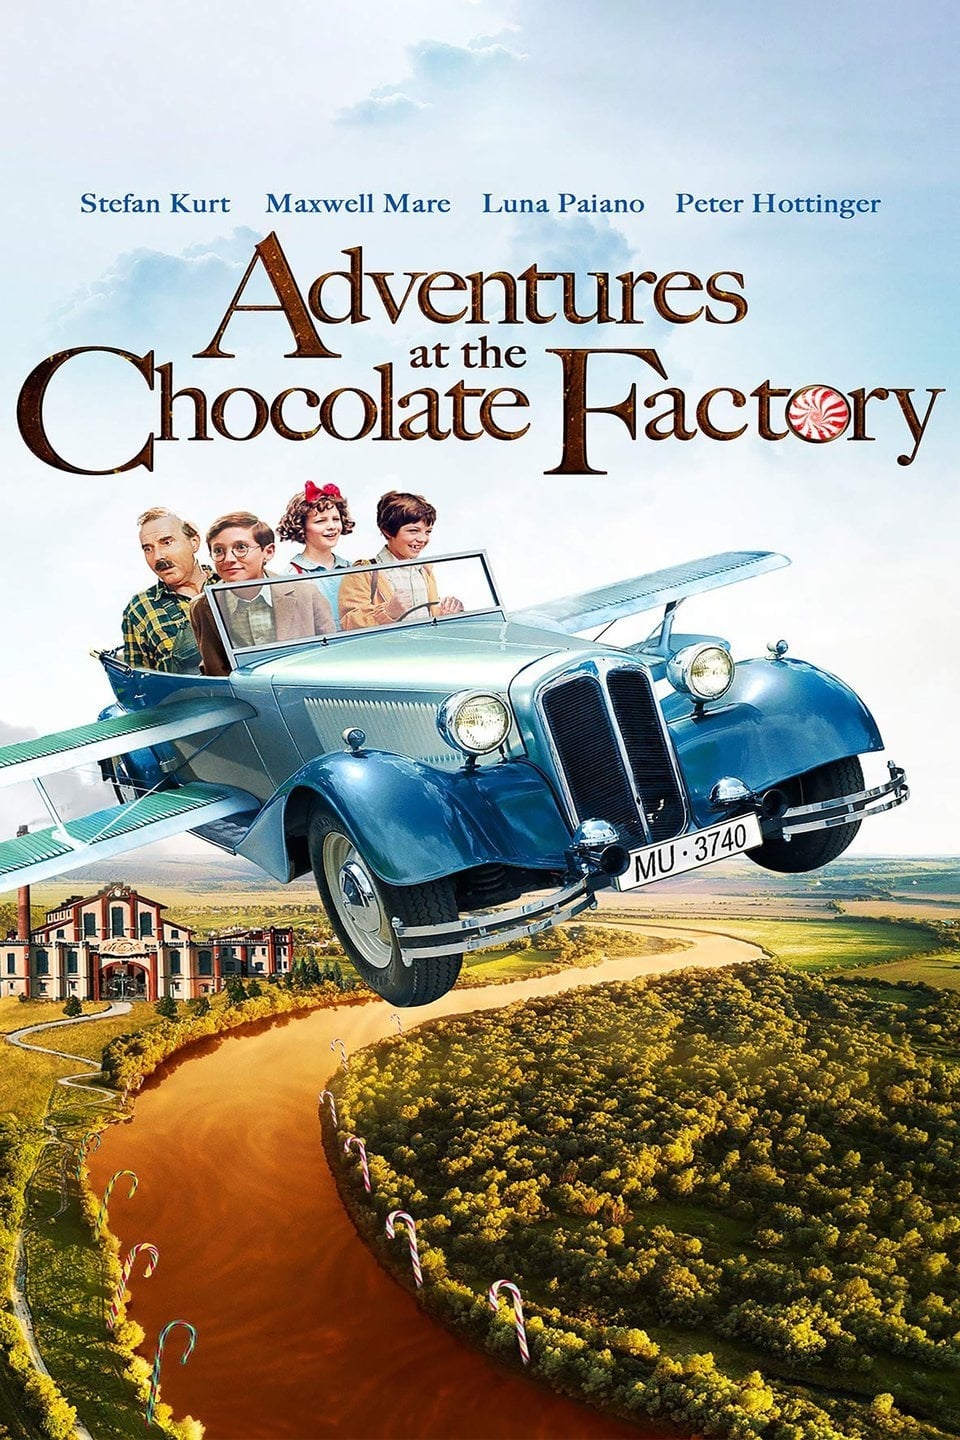 Mr. Moll and the Chocolate Factory (2017)